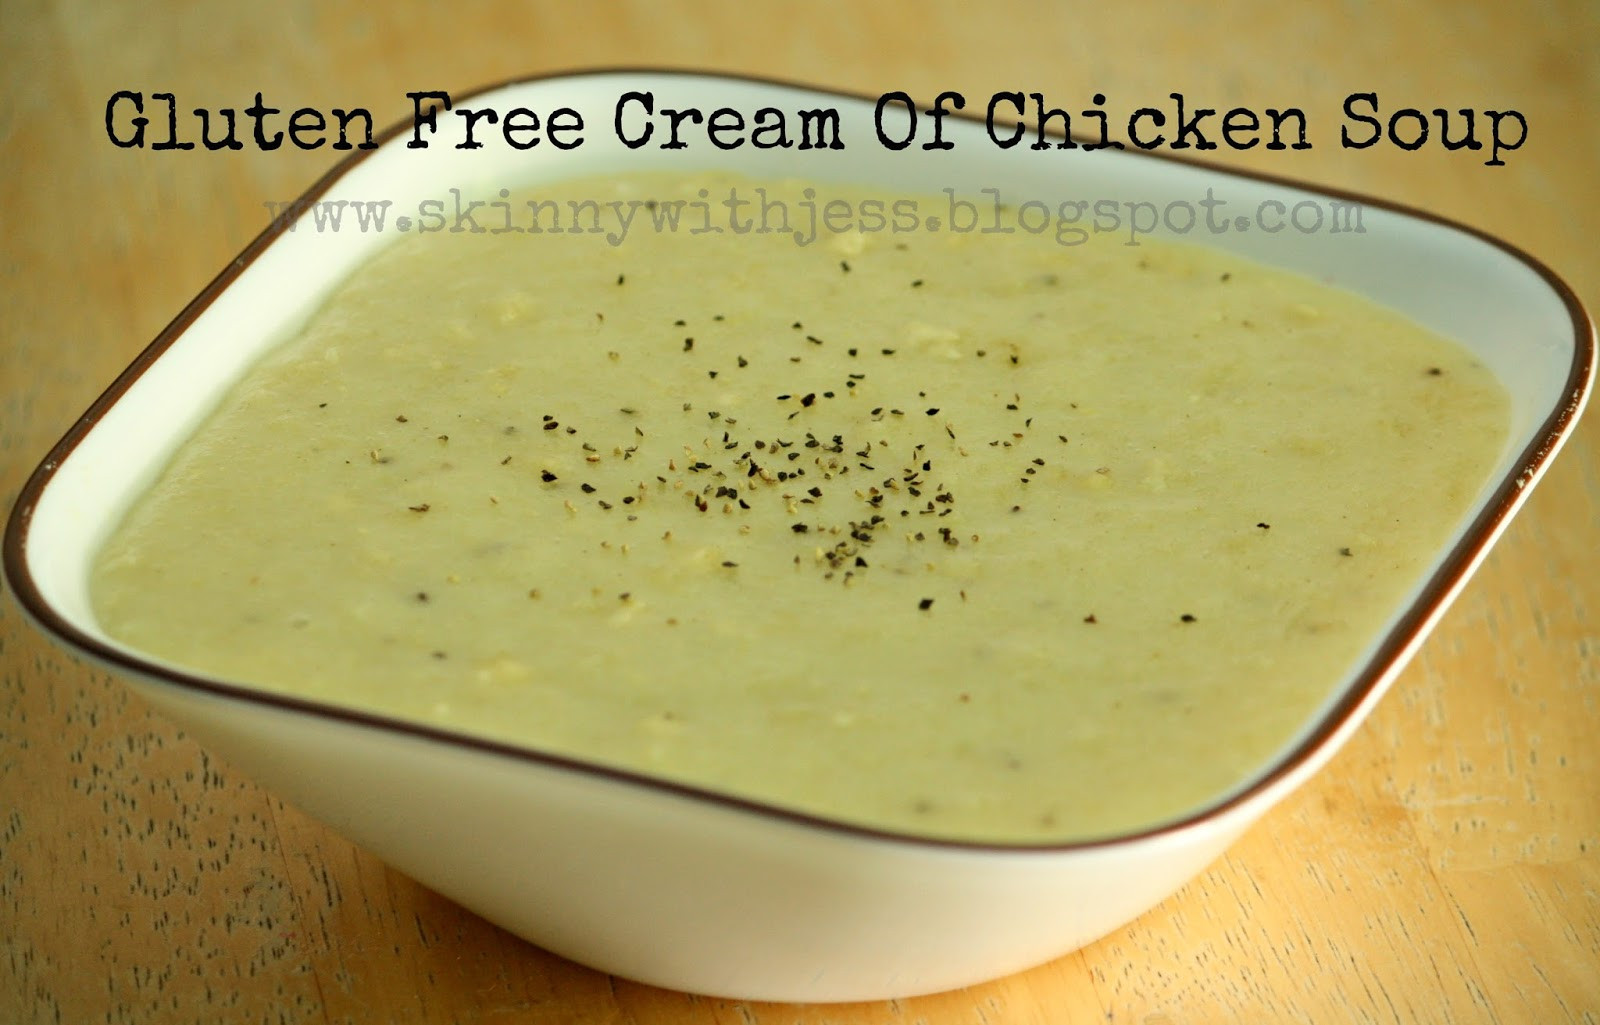 Dairy Free Cream Of Chicken Soup
 This is how we Mommy Gluten Free Cream Chicken Soup